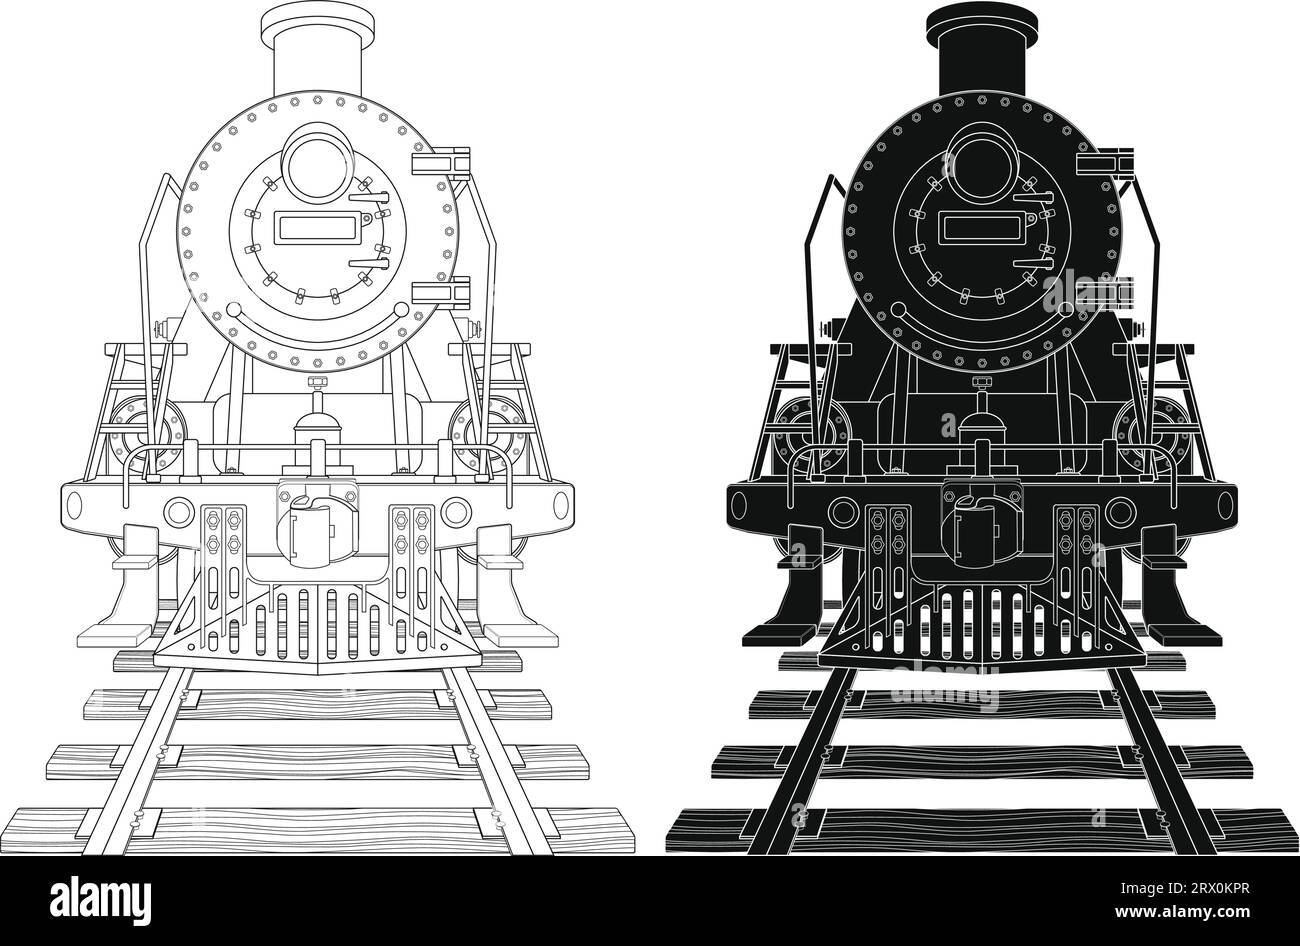 Layered editable vector illustration silhouette of old fashioned steam locomotive. Stock Vector